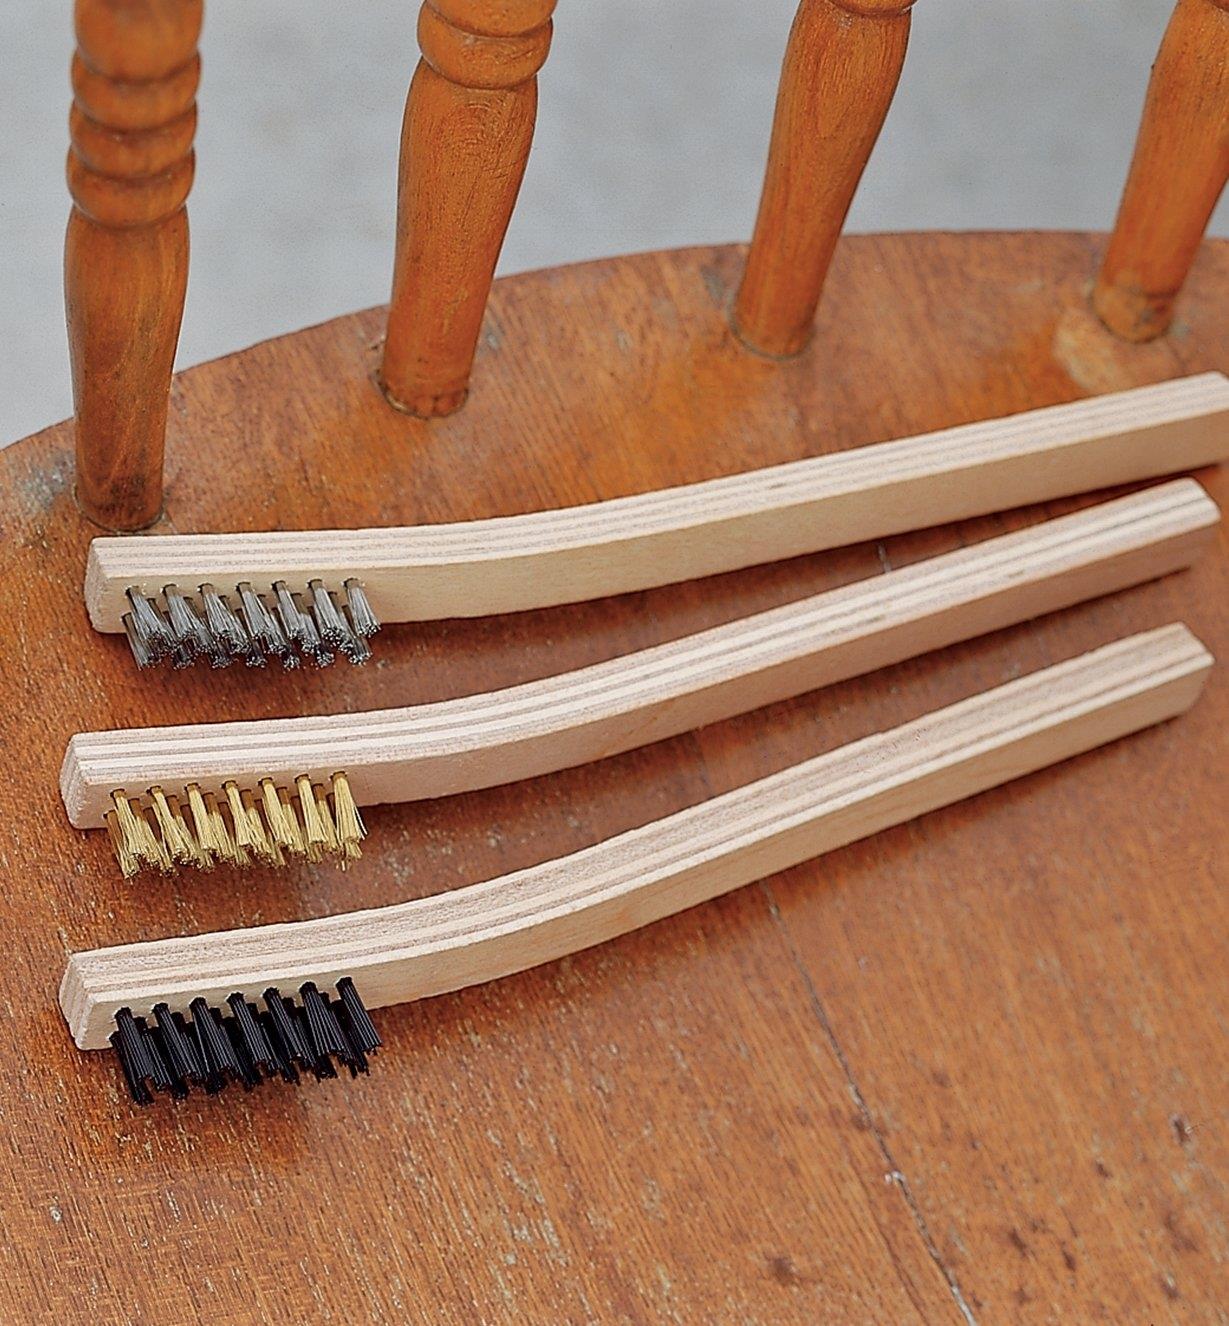 Set of 3 Brushes placed on a wooden chair seat